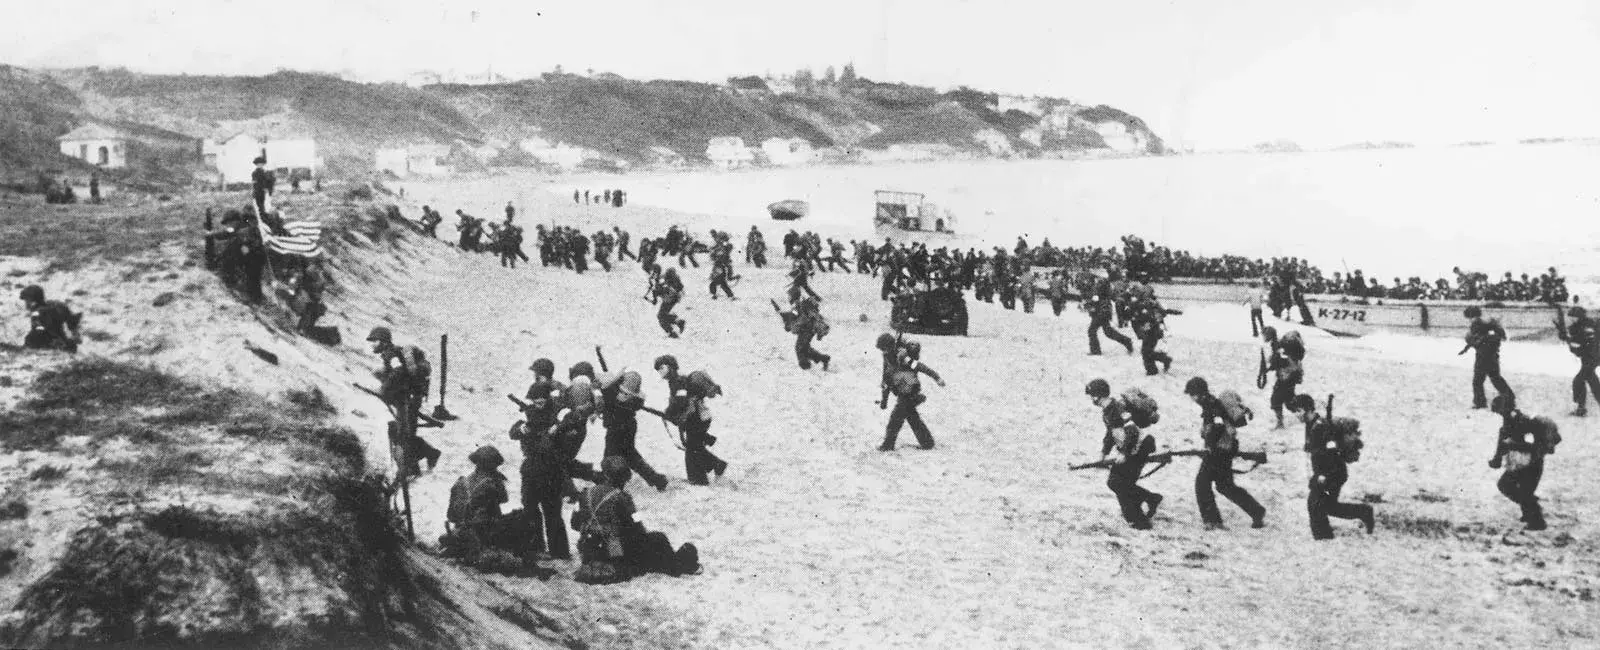 A black and white photograph of American soldiers landing on a beach. Landing craft are visible on the right and still unloading, other soldiers are approaching a small slope. Loosely scattered houses are visible in the distance.